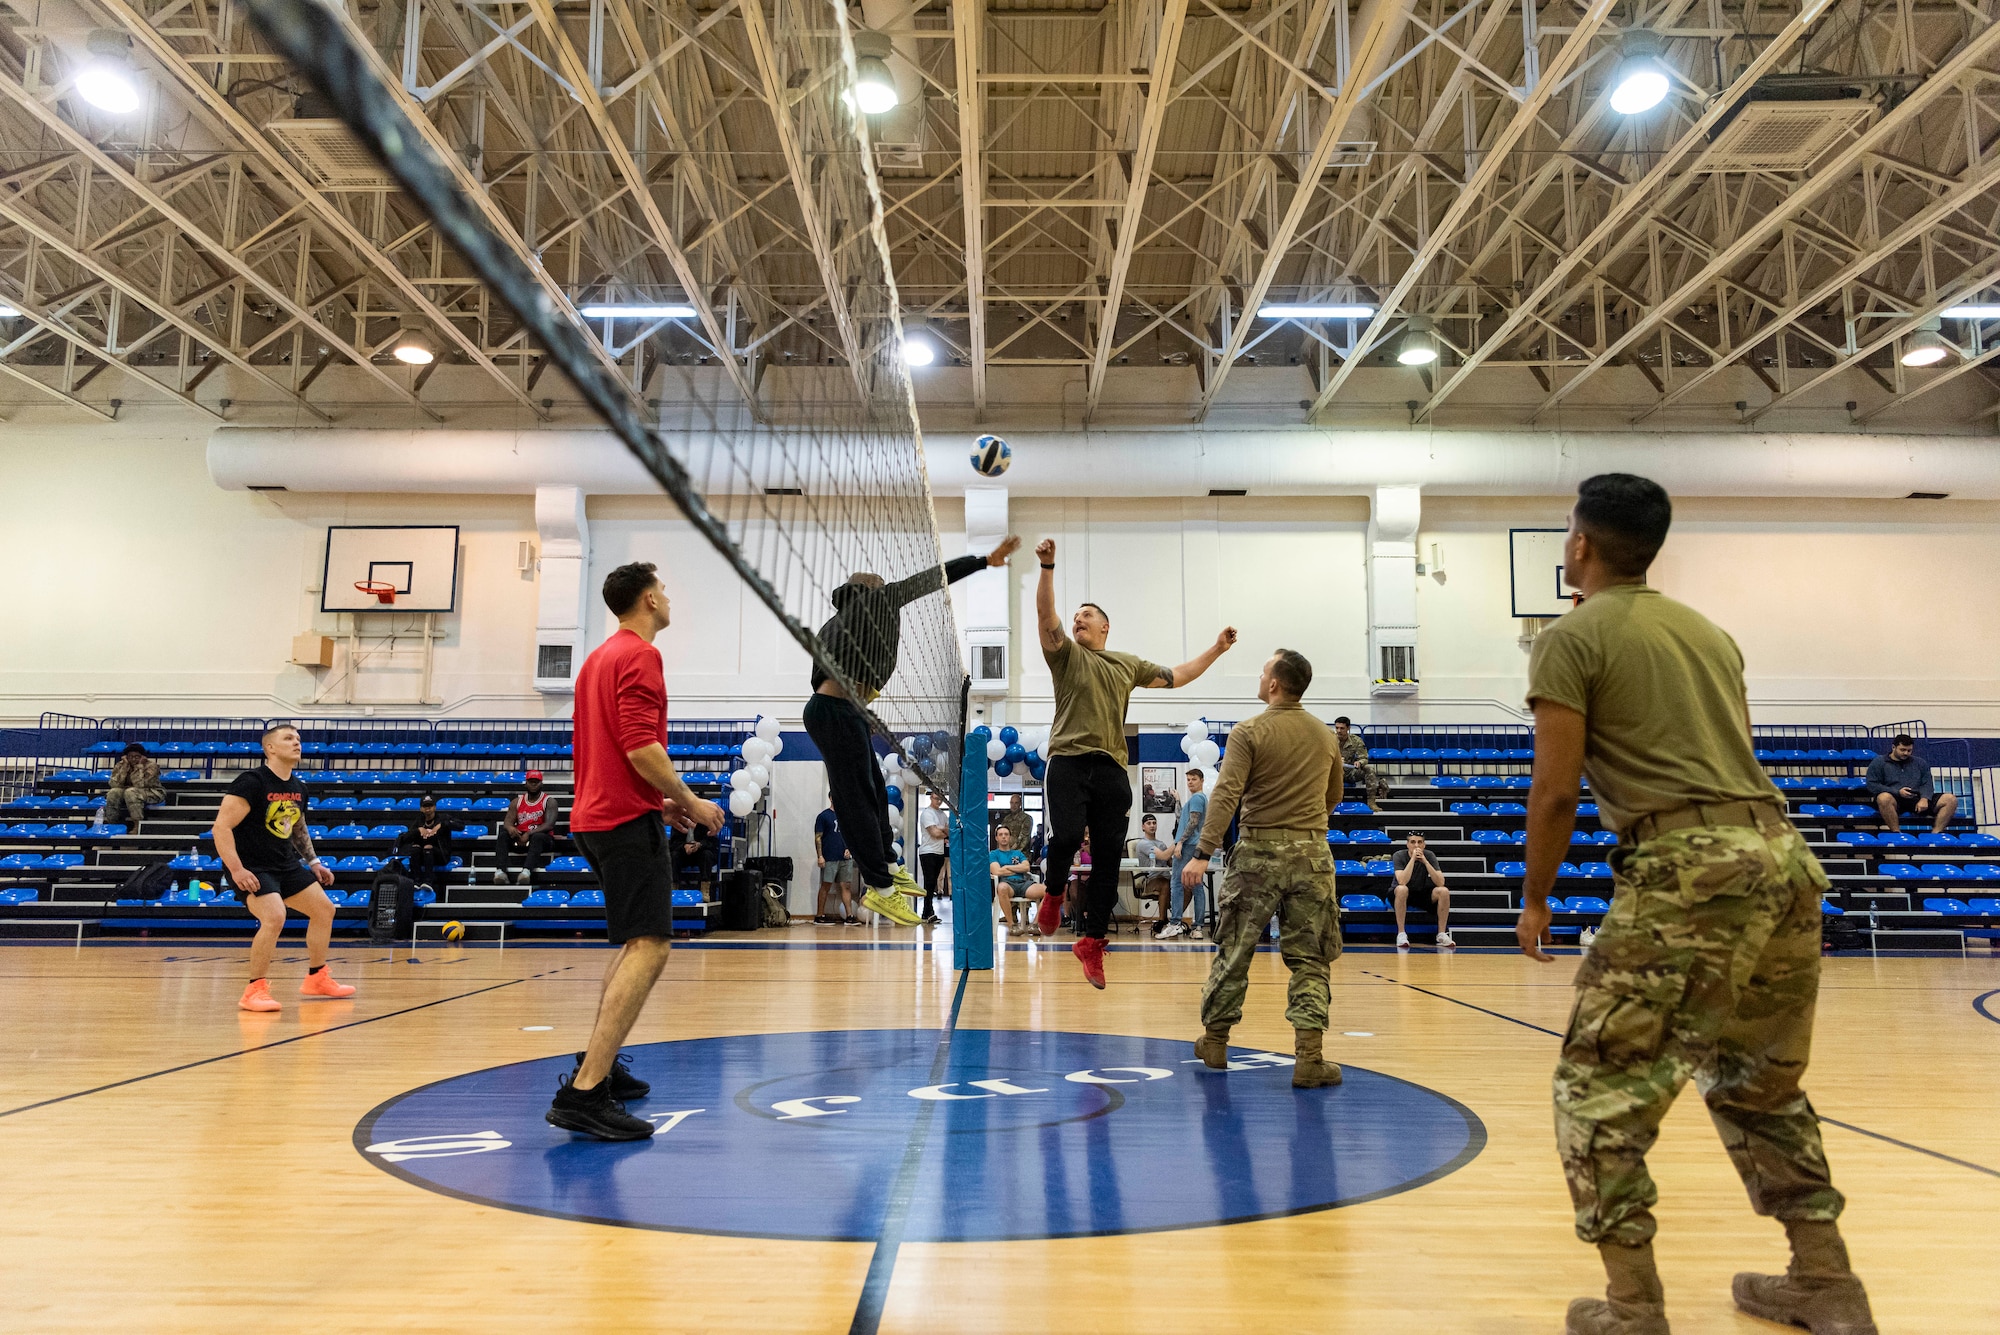 Airmen from across the 39th Air Base Wing participate in a volleyball tournament during the Air Force Assistance Fund kick-off event at Incirlik Air Base, Turkey, March 3, 2022. AFAF is a collection of four charities that combine their efforts to provide humanitarian assistance, educational support and financial aid to our Air Force family members in need.